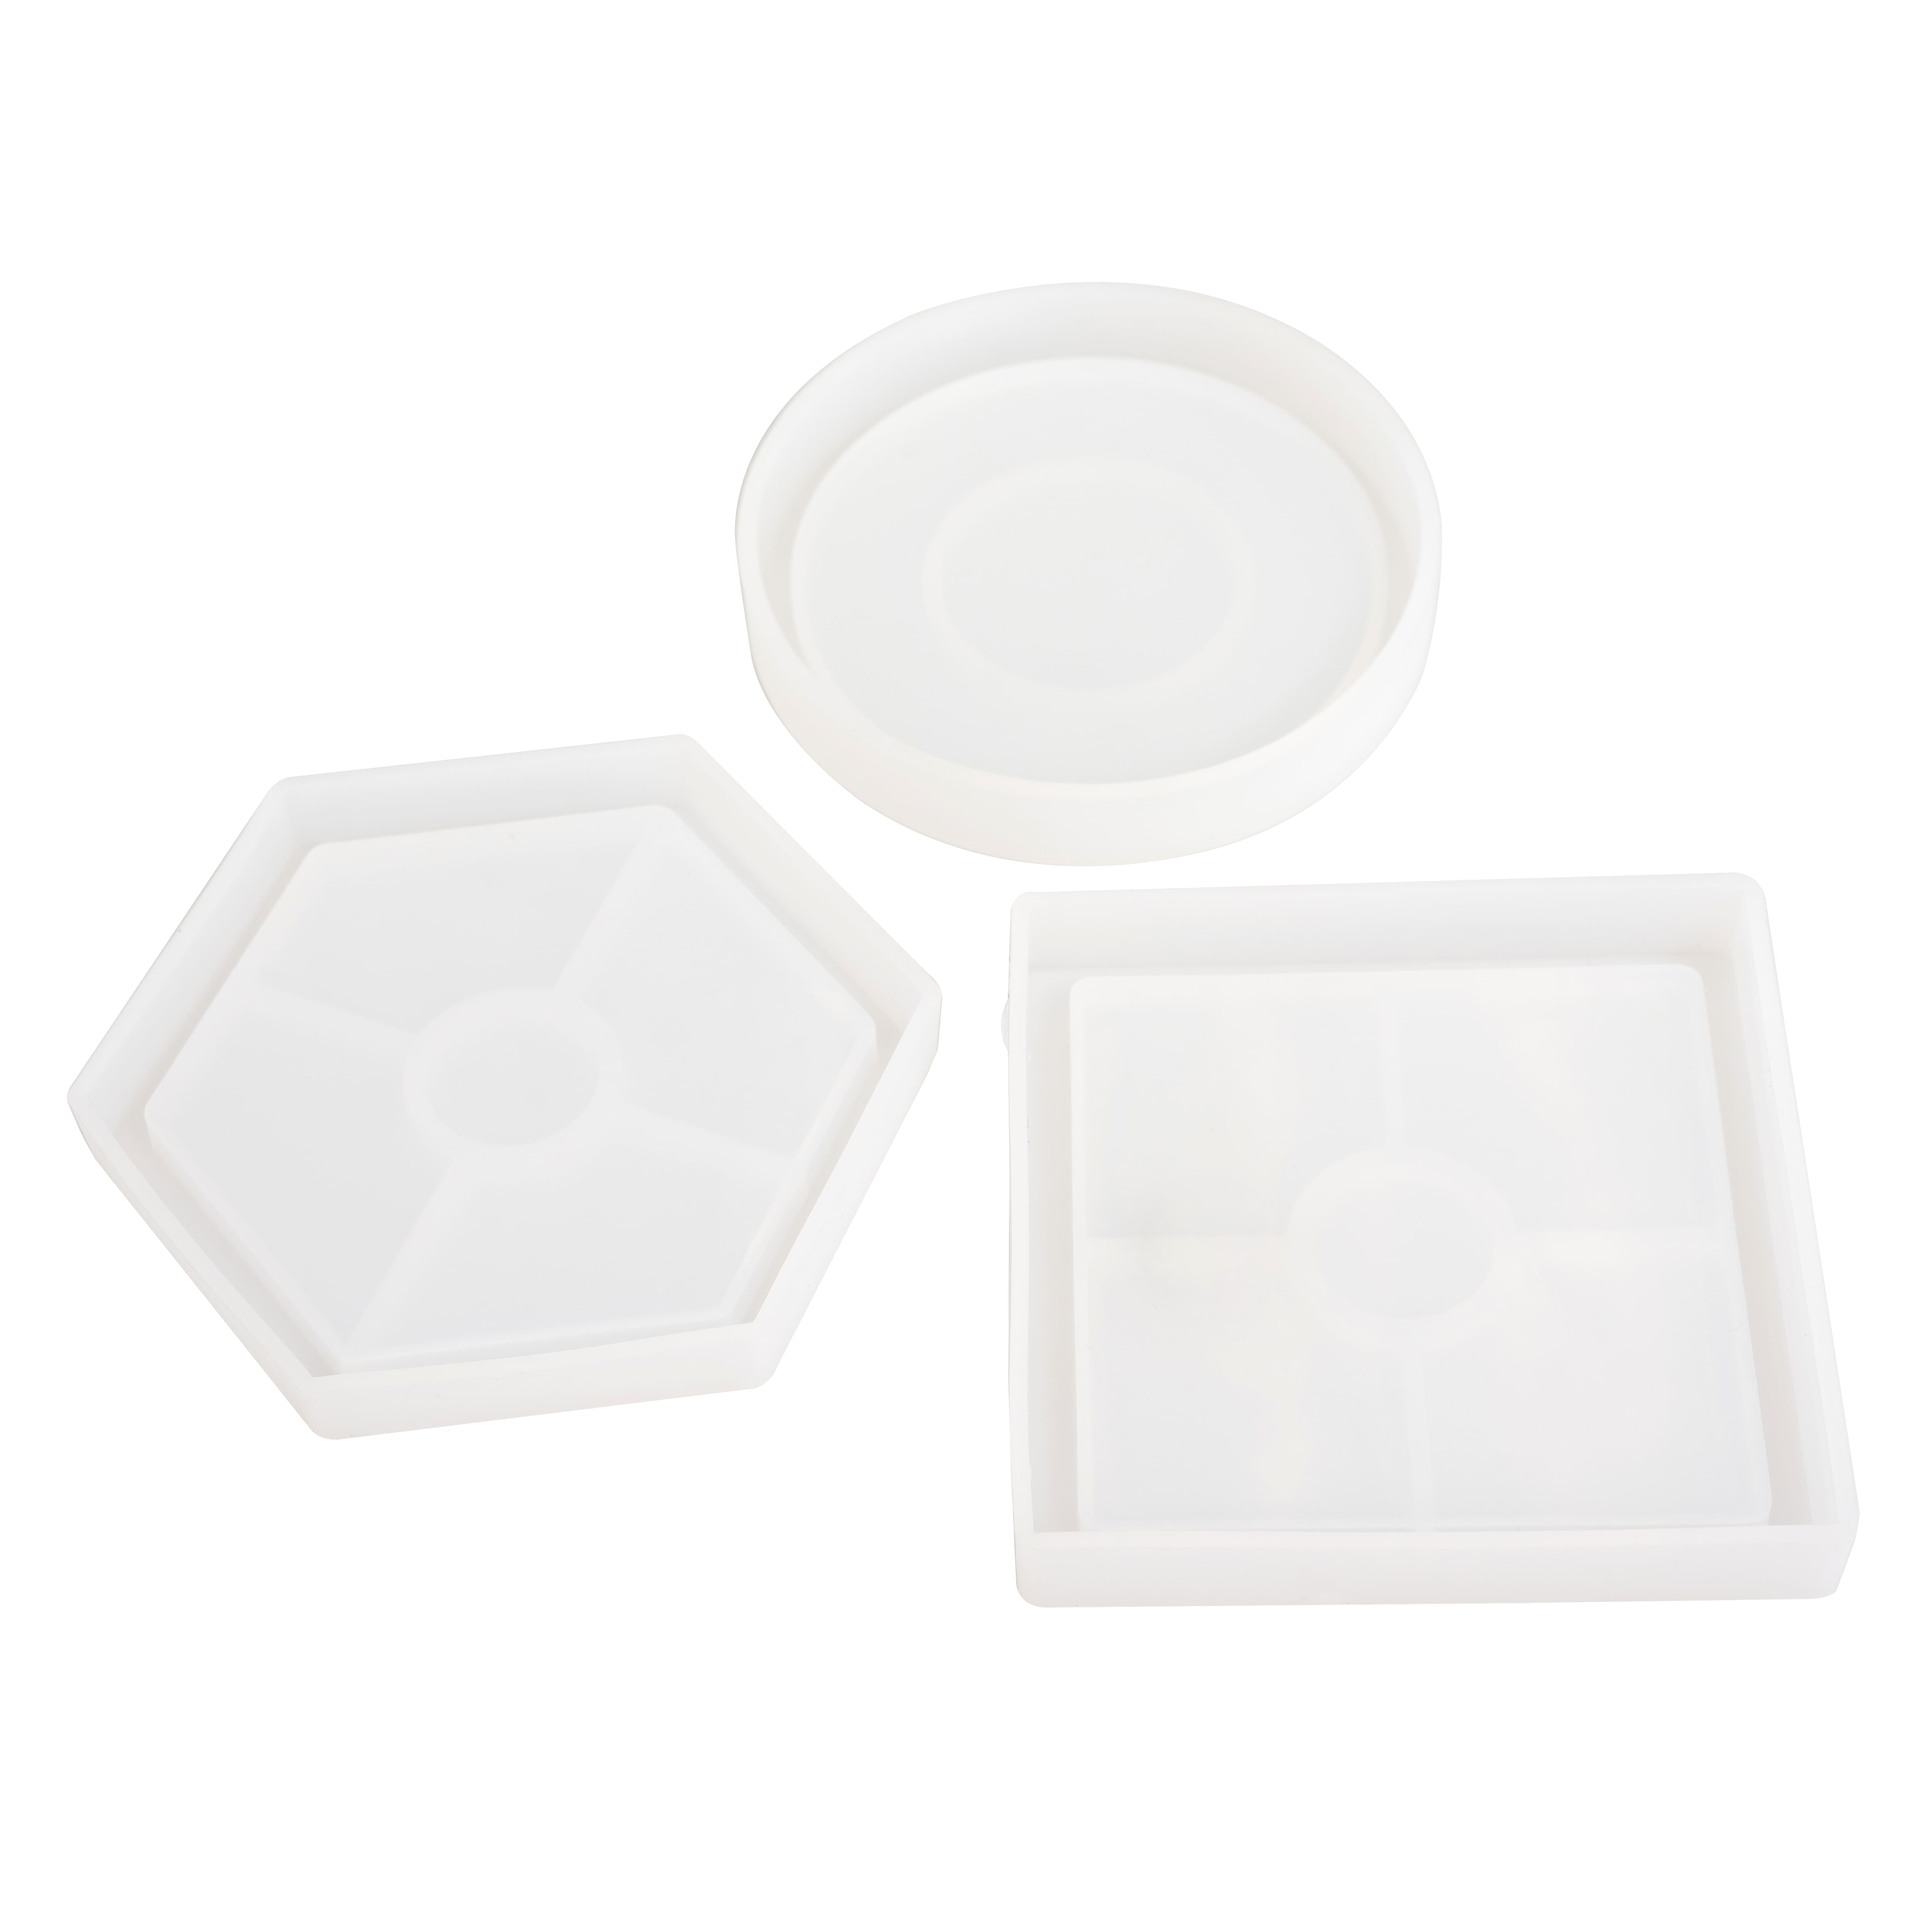 Silicone Coasters Molds by Craft Smart® 